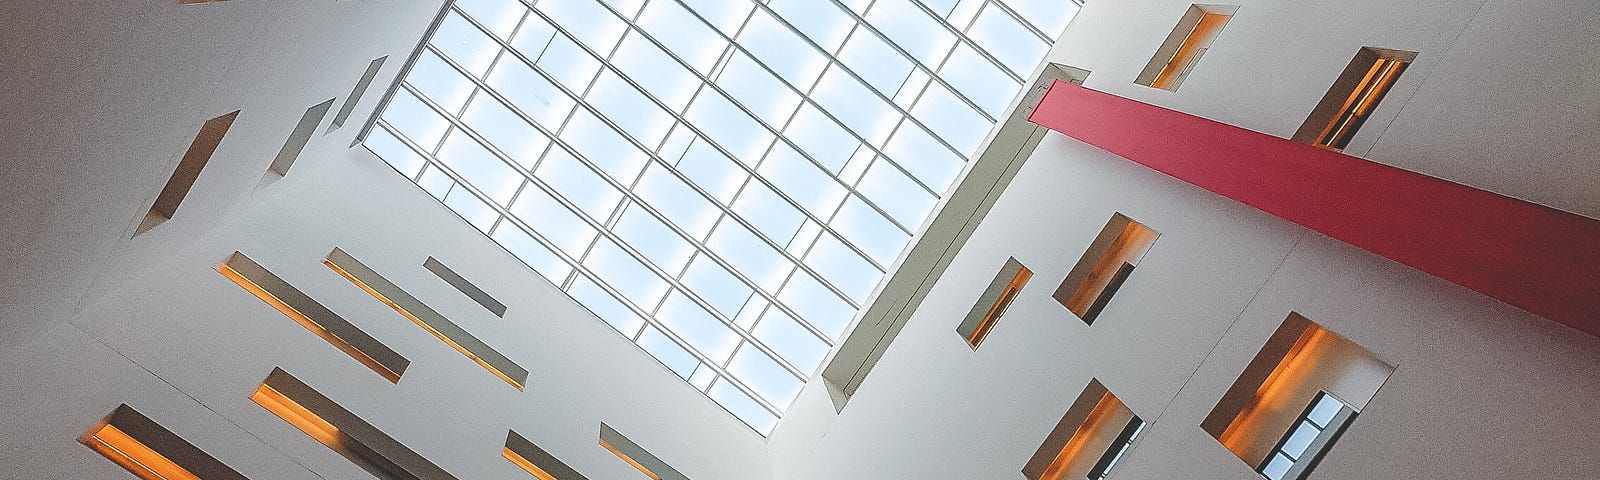 Looking up at a windowed ceiling, with windows scattered on three sides of the building.